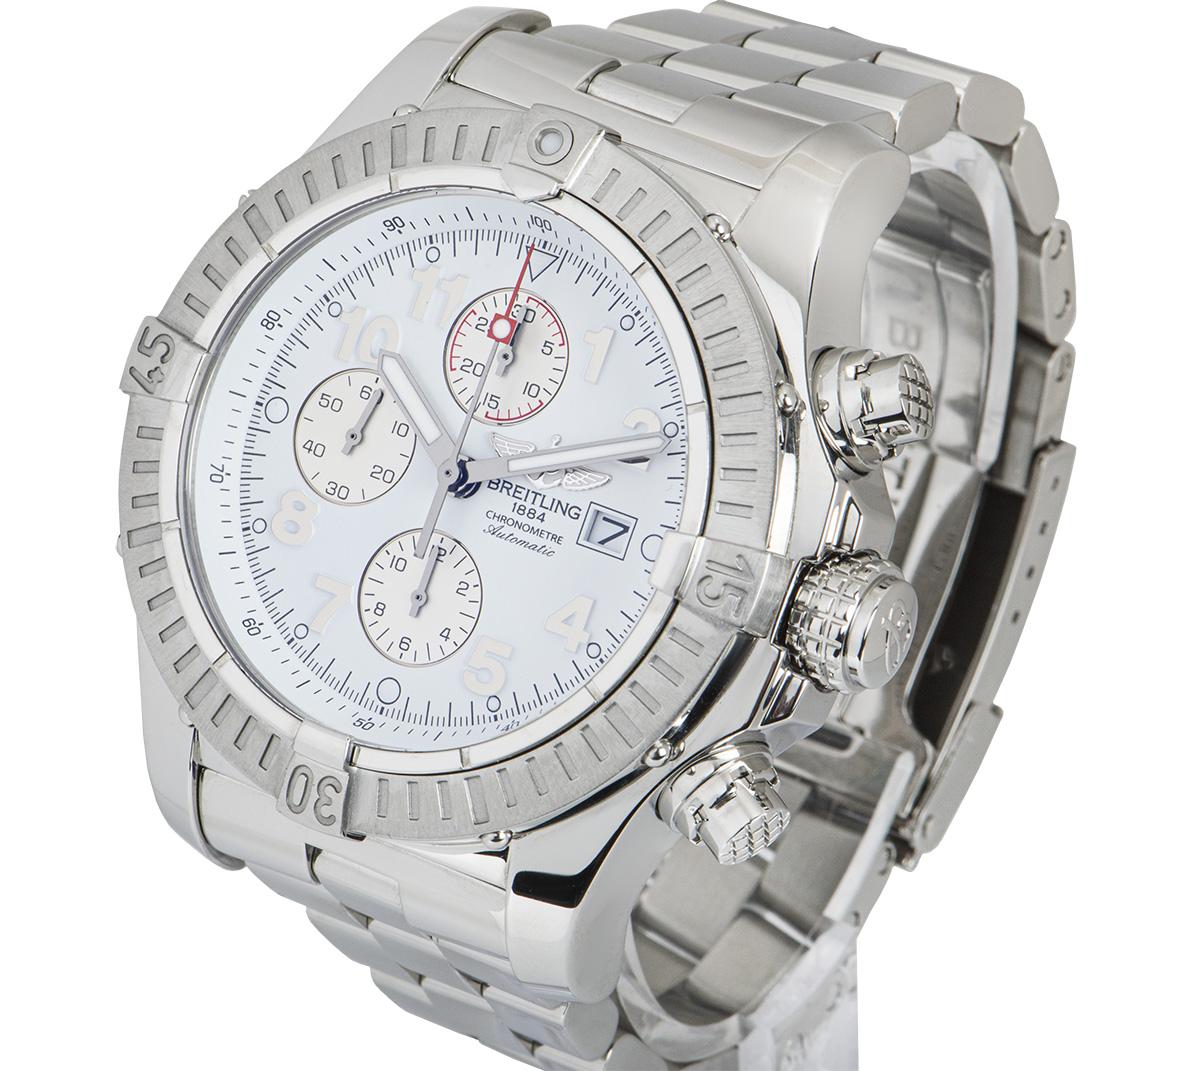 A 48 mm Super Avenger by Breitling in stainless steel. Featuring a white dial that has a date display, small seconds, a 12 hour and a 30 minute counter. The bracelet is equipped with a deployant clasp. Fitted with sapphire glass and an automatic